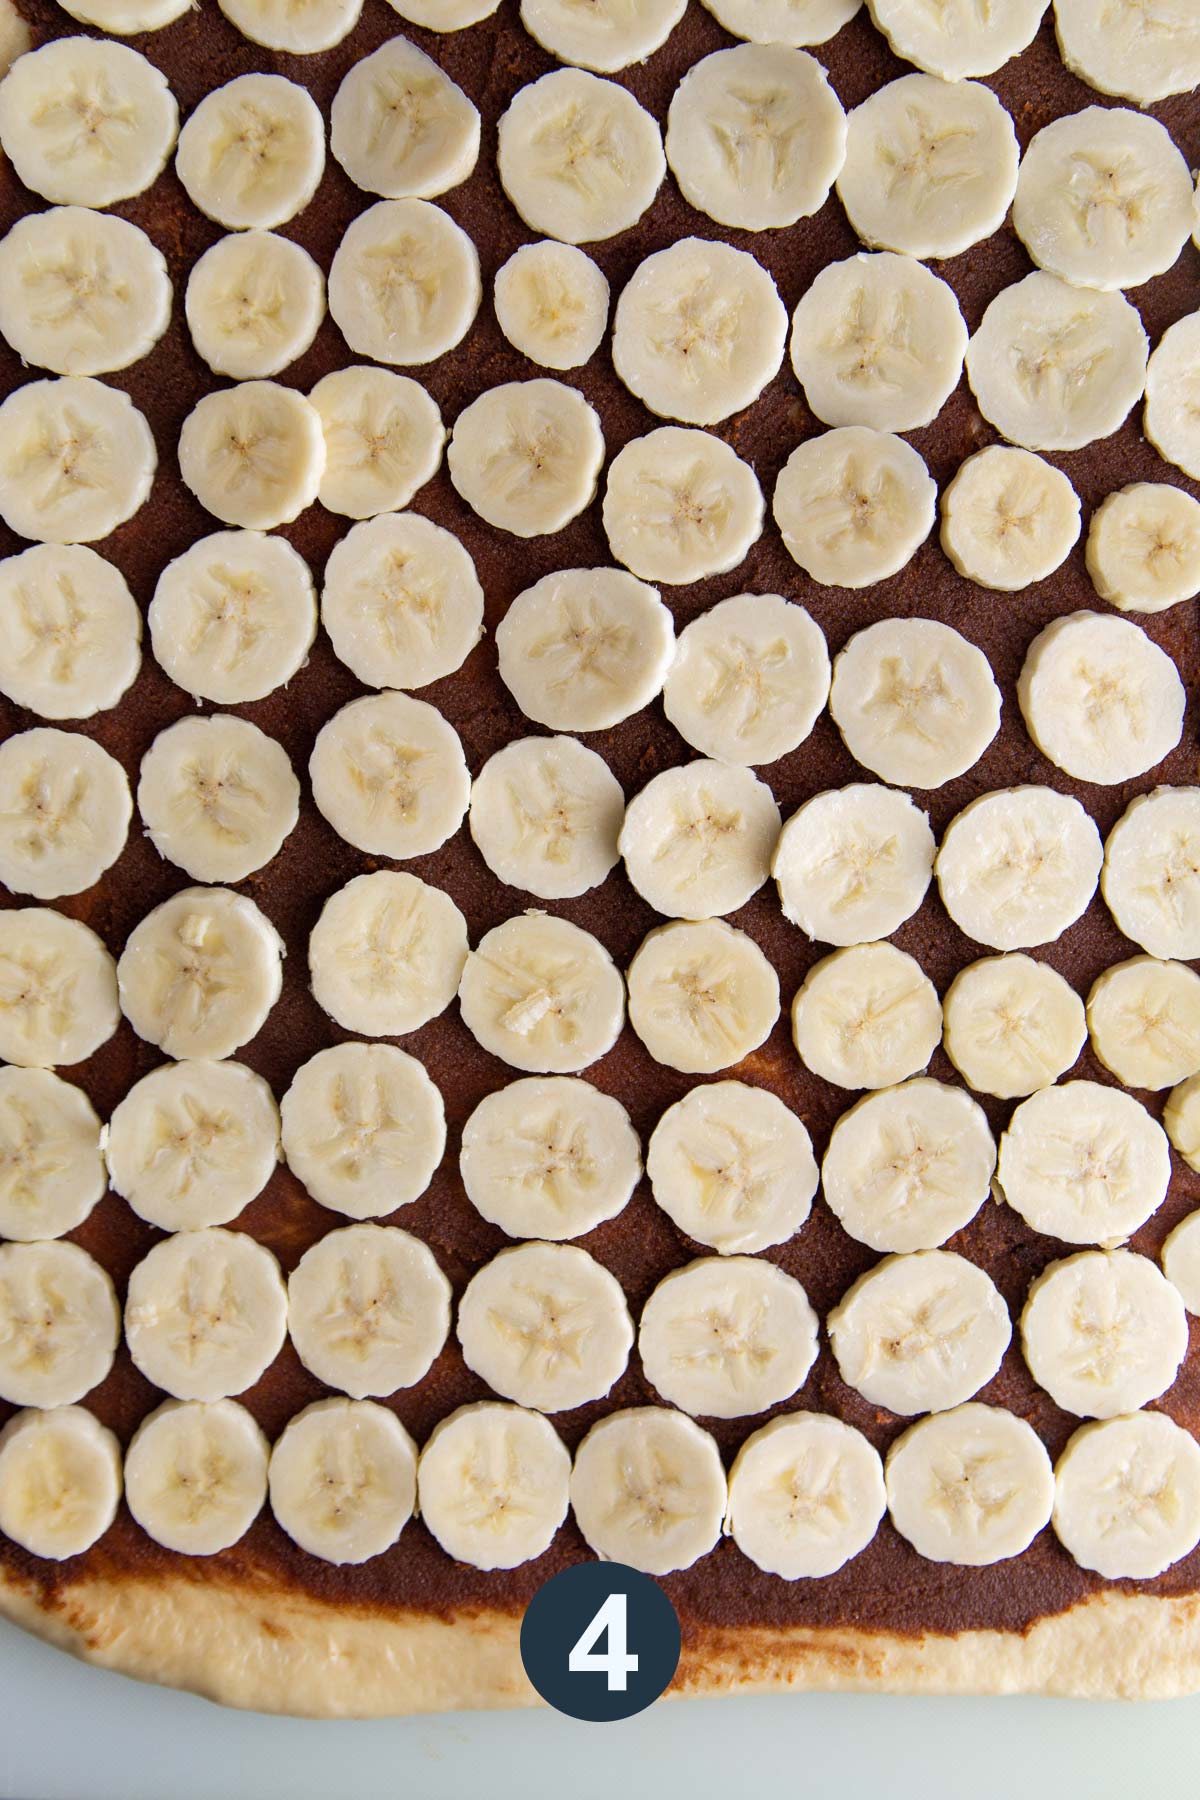 spread cinnamon sugar filling and top with banana slices. 